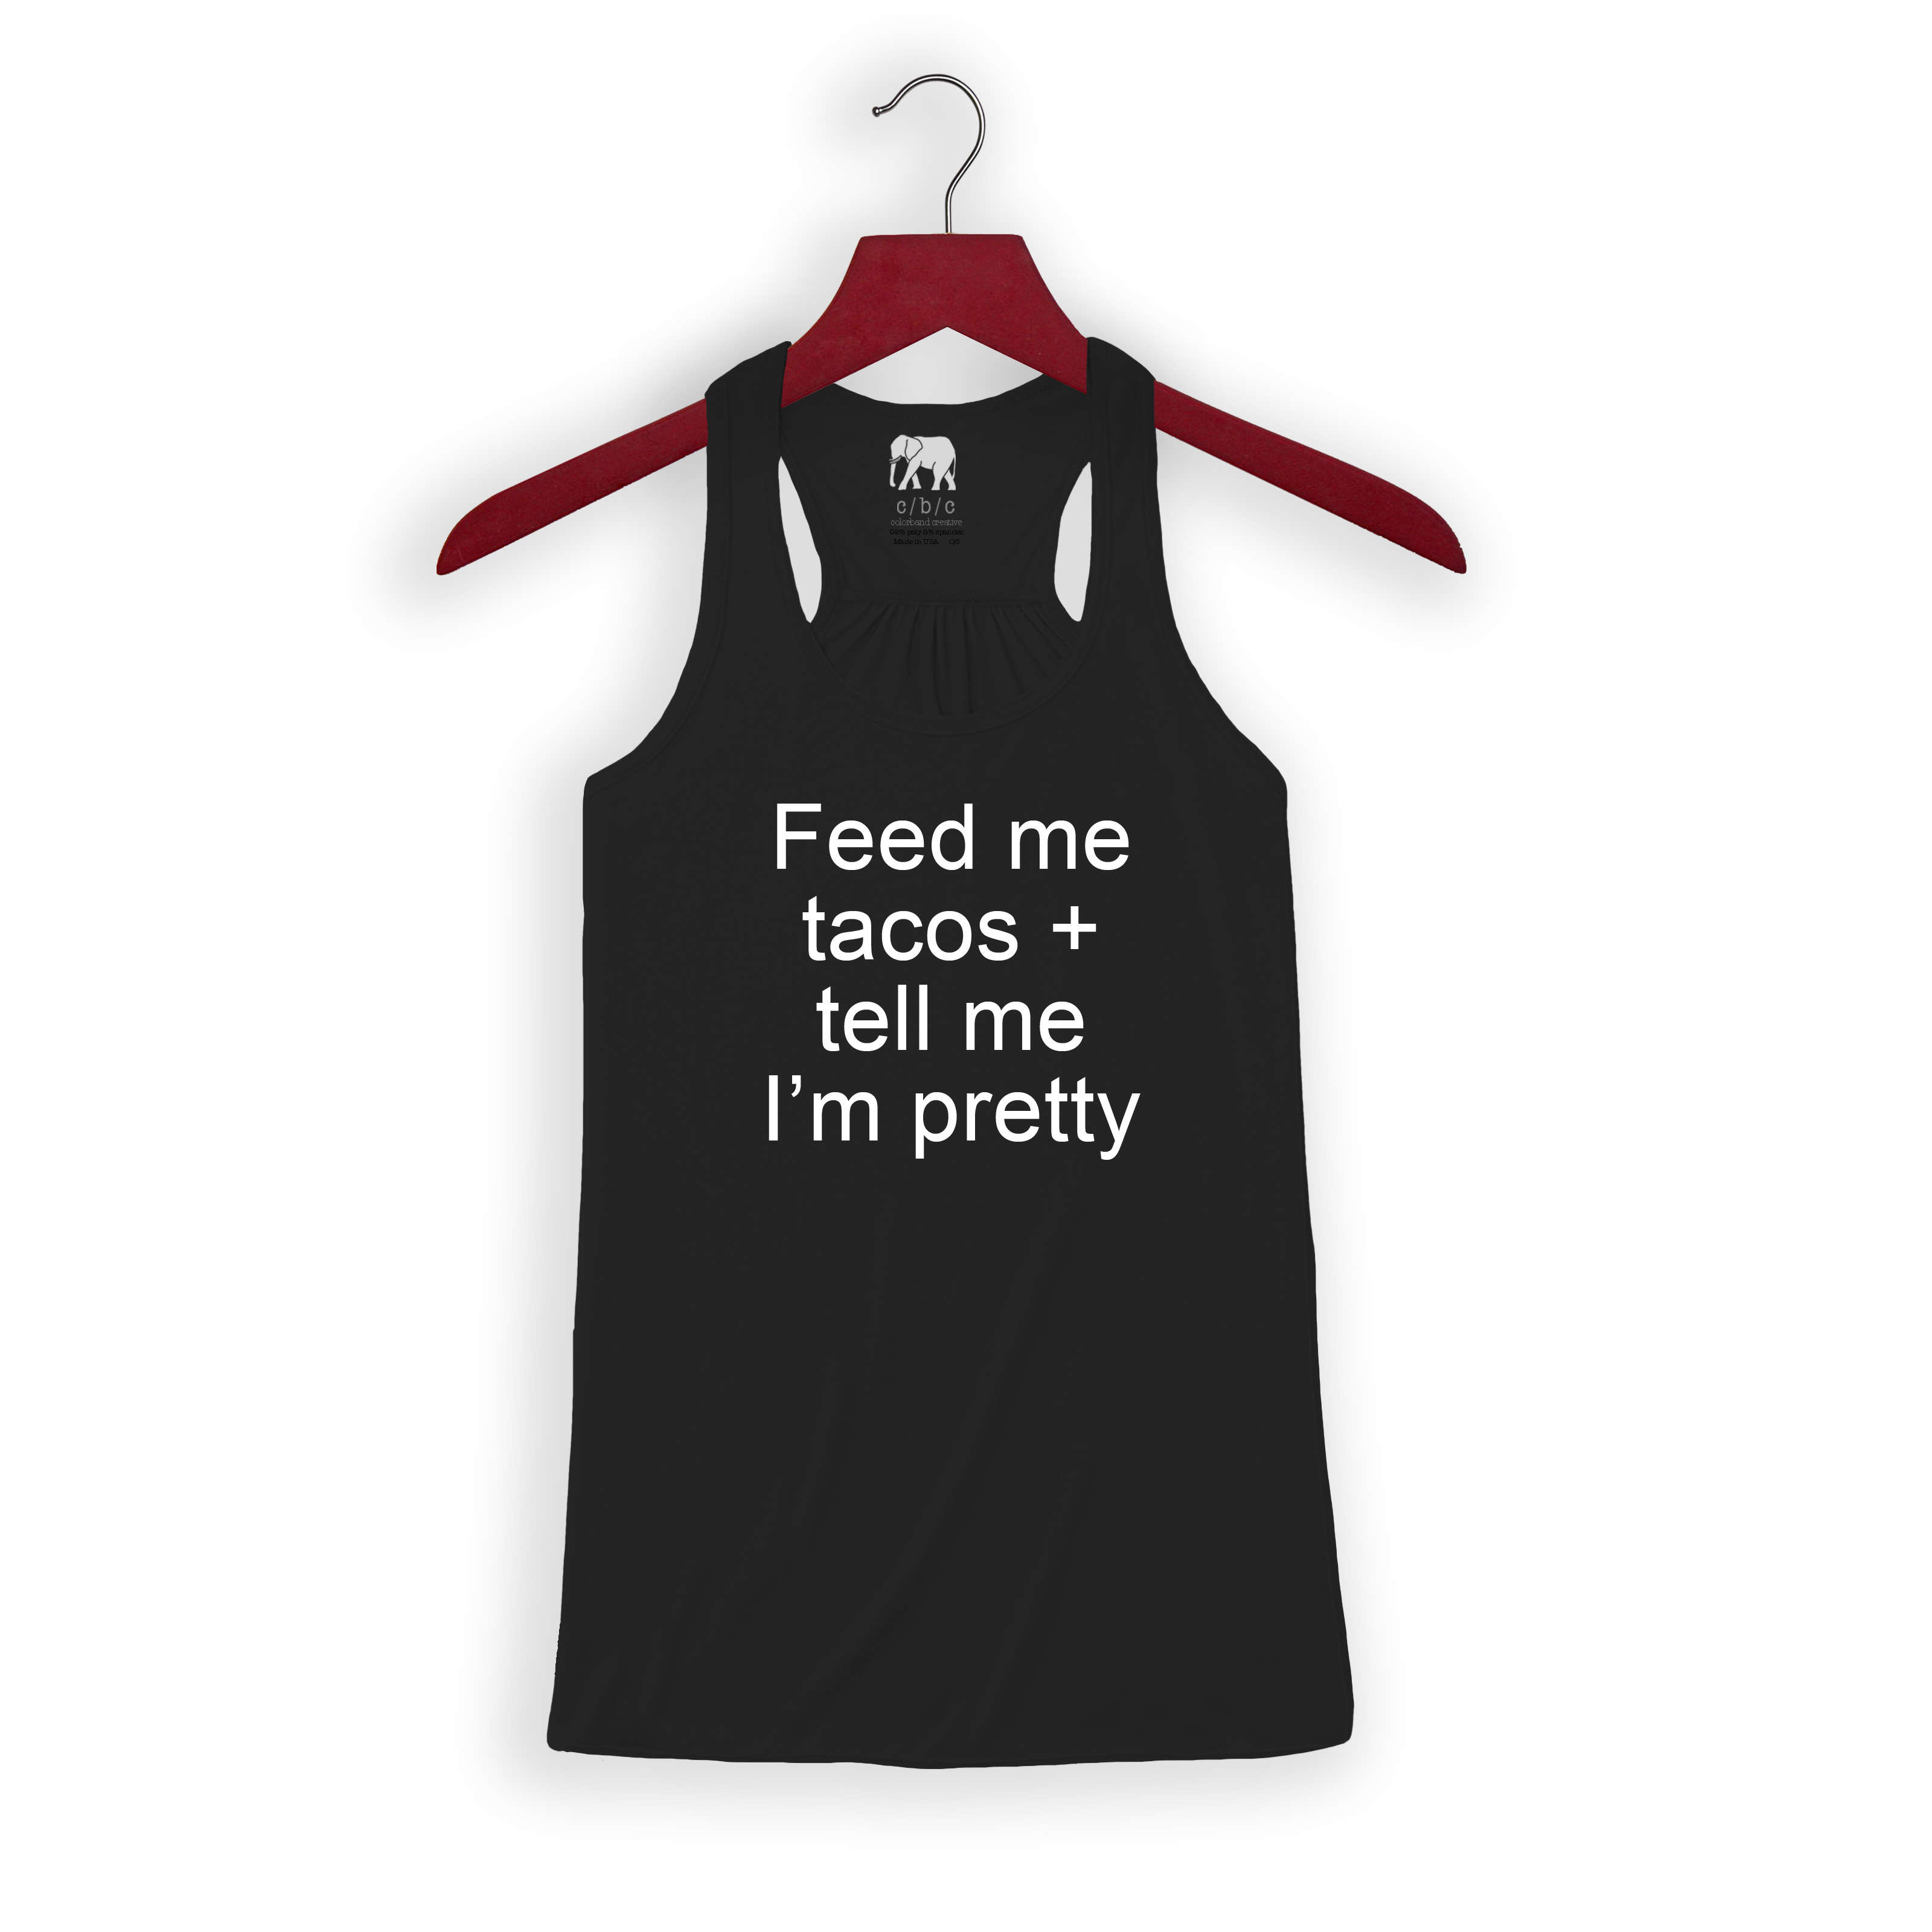 ‘Feed me tacos and tell me I’m pretty’ Tank Top – Colorband Creative